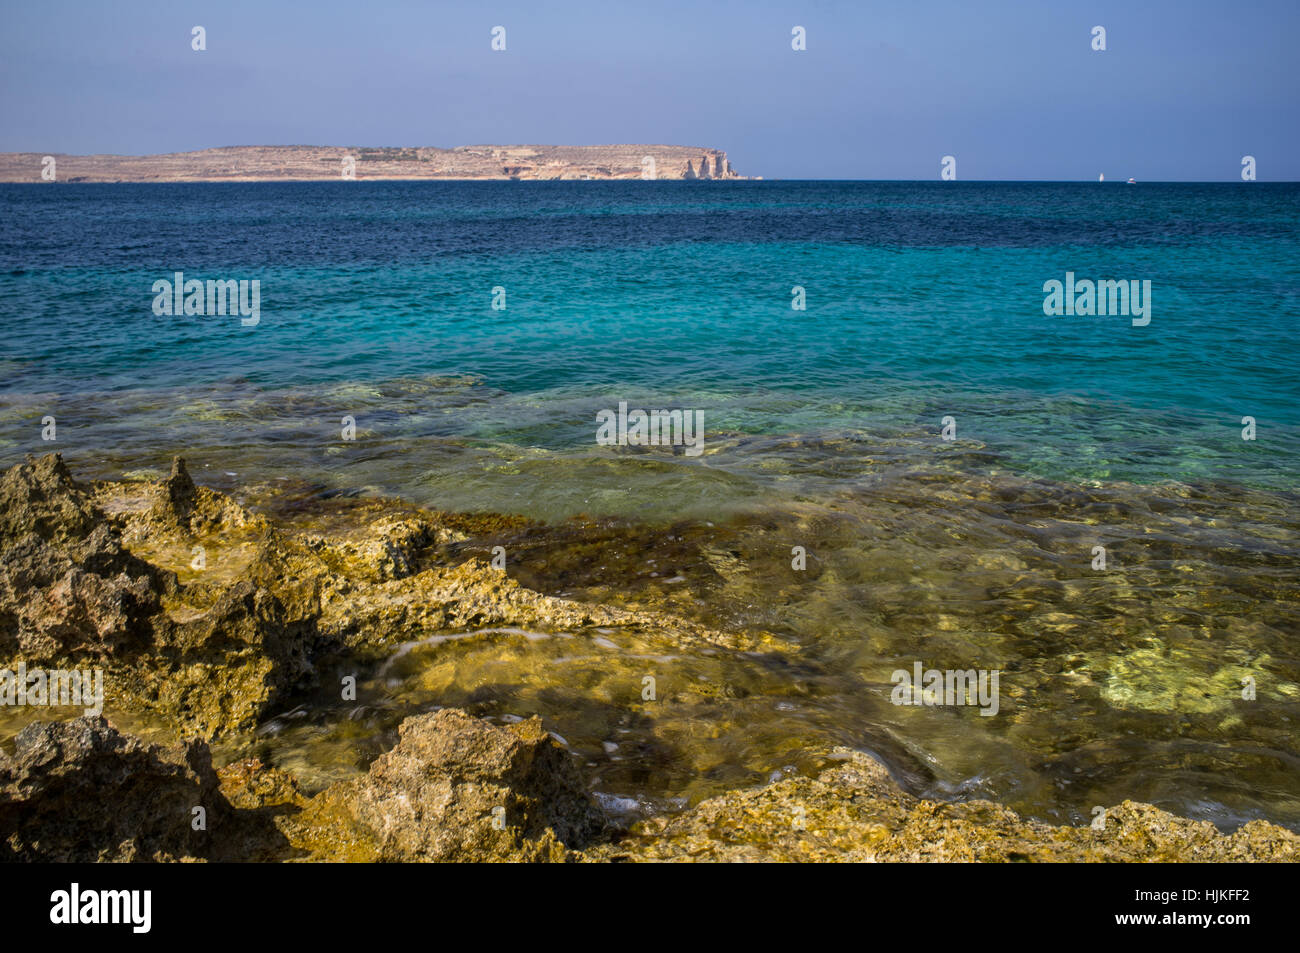 The beautiful blue waters looking out to sea from Malta Stock Photo